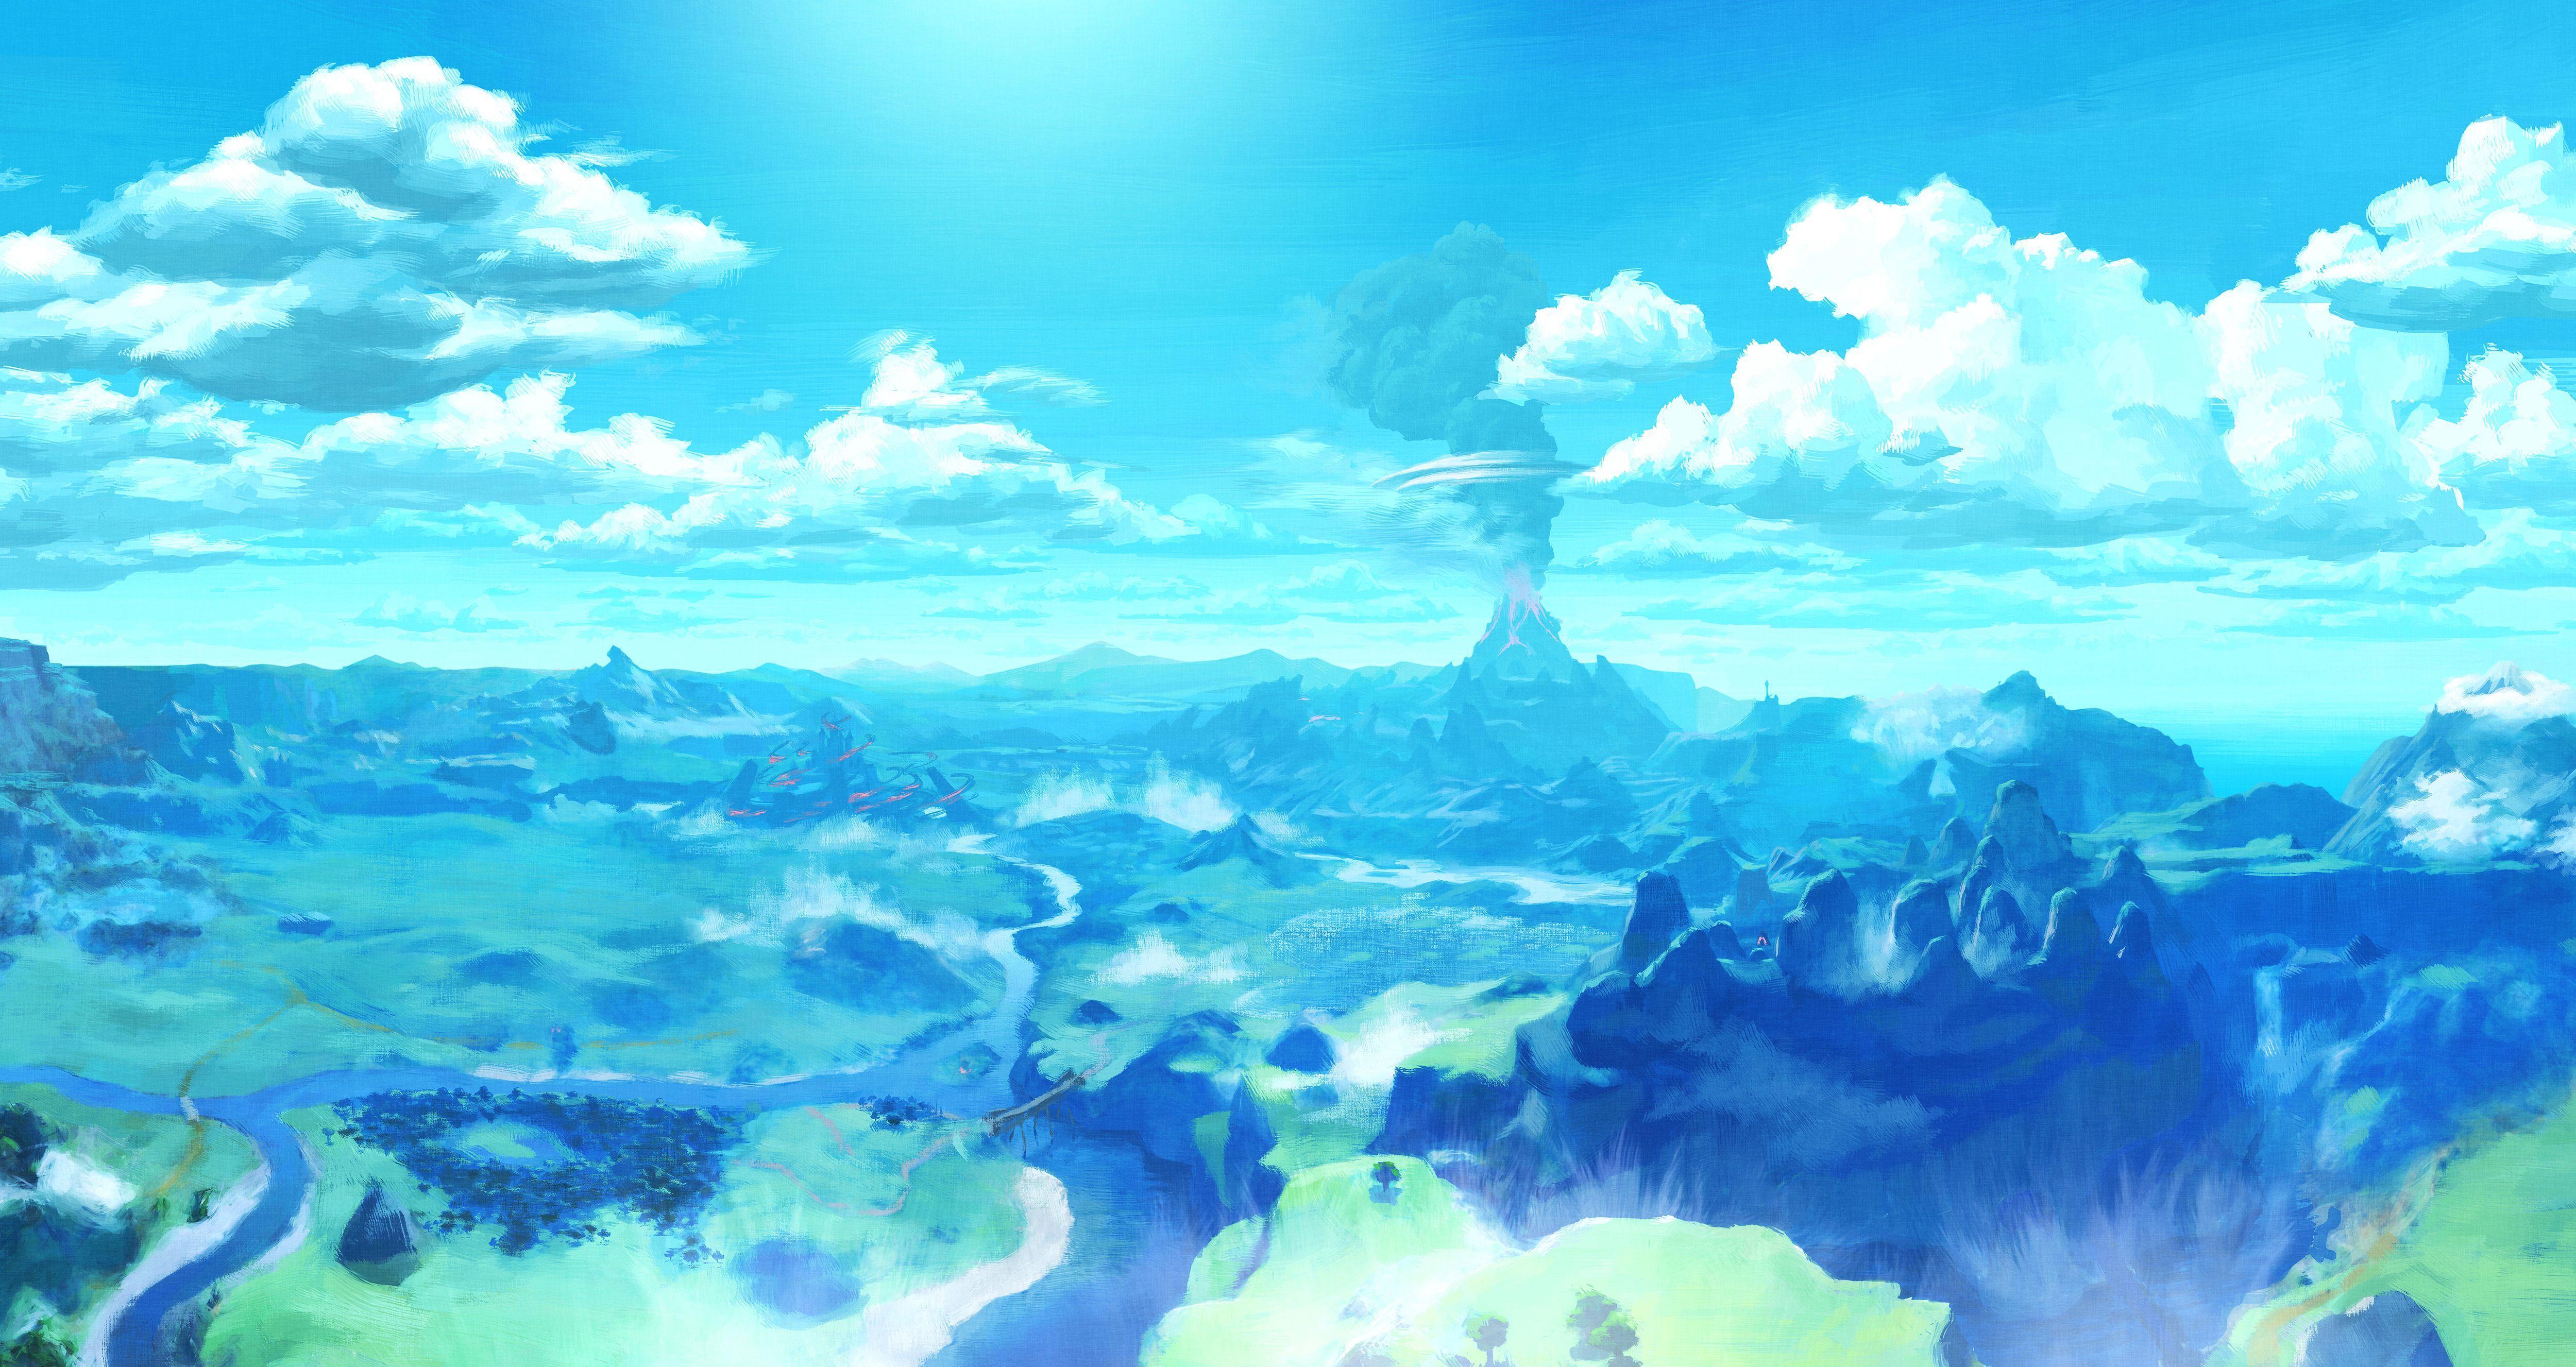 5000 x 2654 · jpeg - Breath Of The Wild Wallpapers - Wallpaper Cave